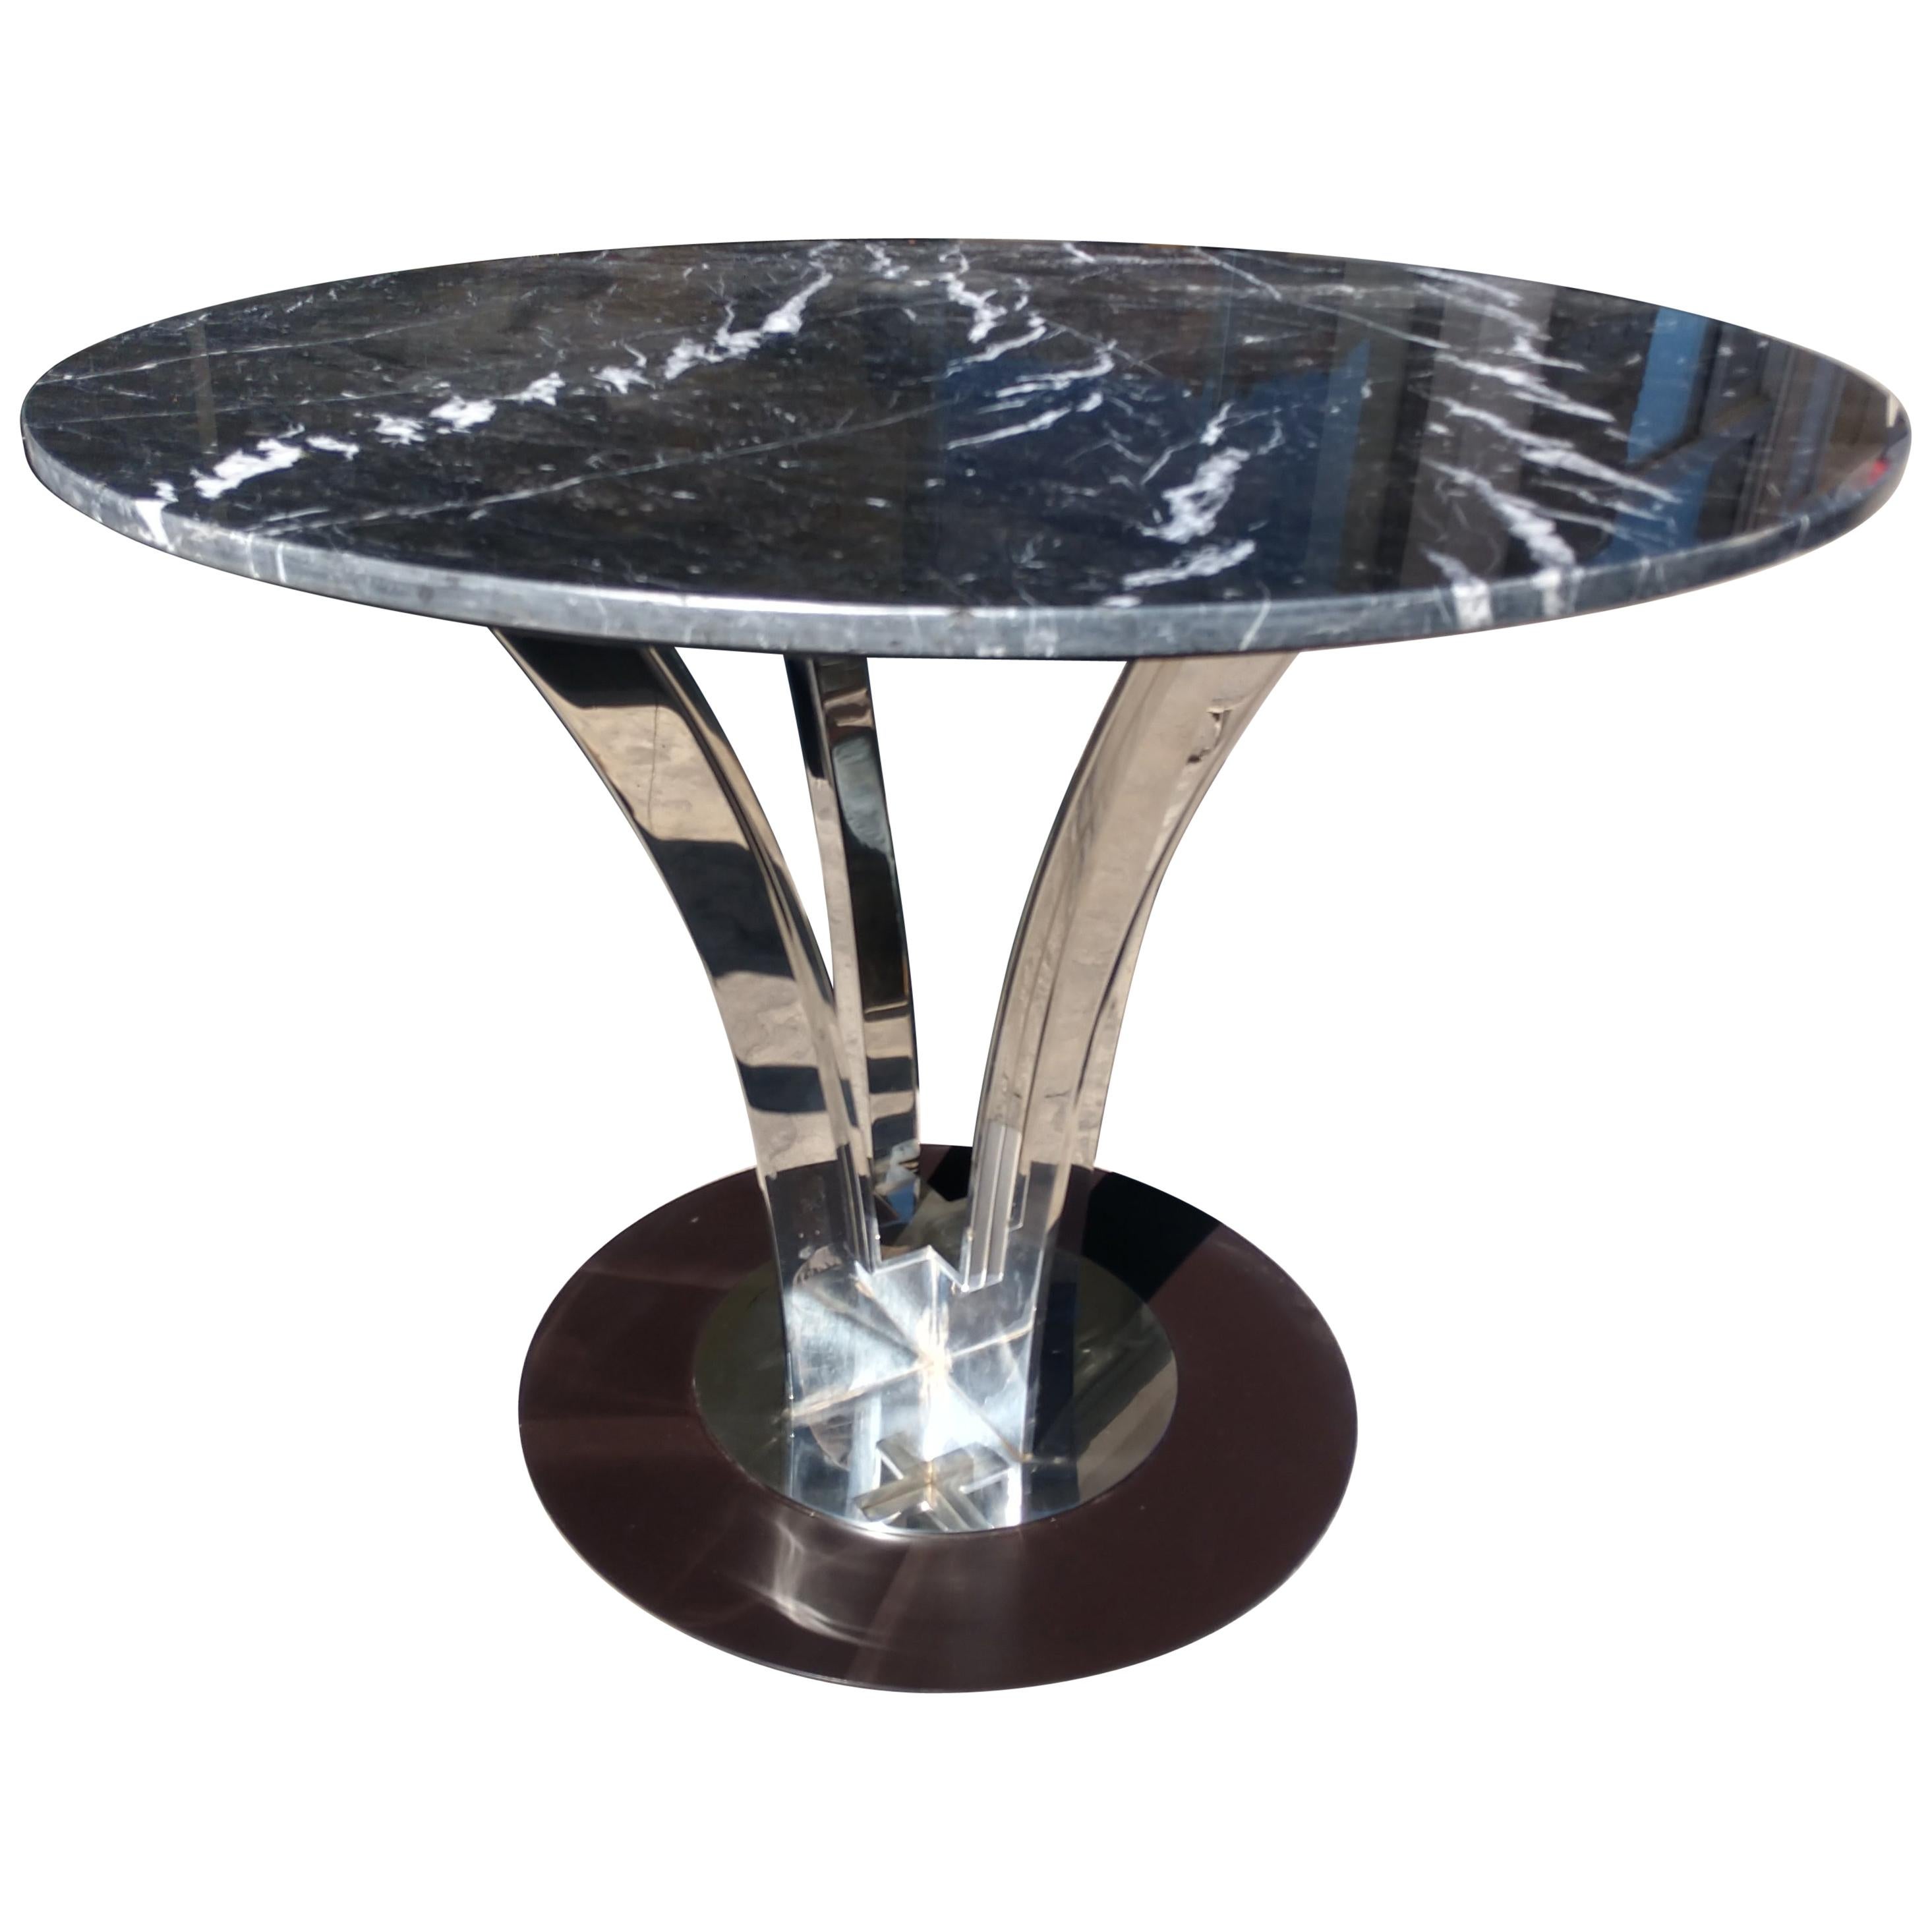 Mid Century Stainless Steel Table with Marbletop Roberto Cavalli